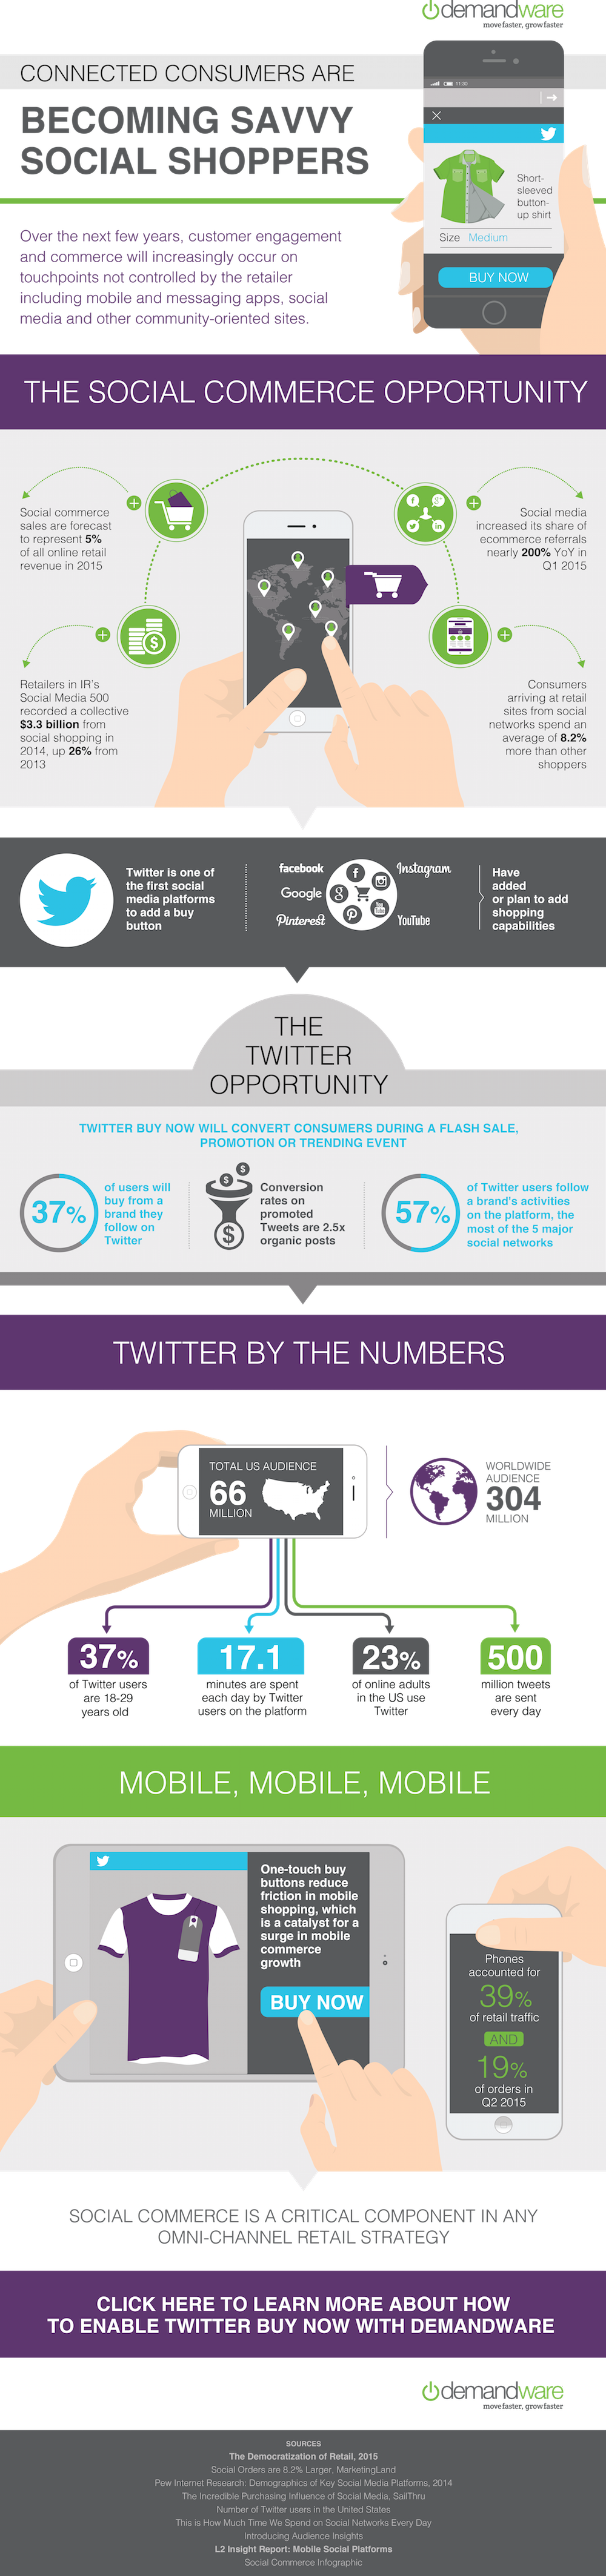 twitter_infographic_final